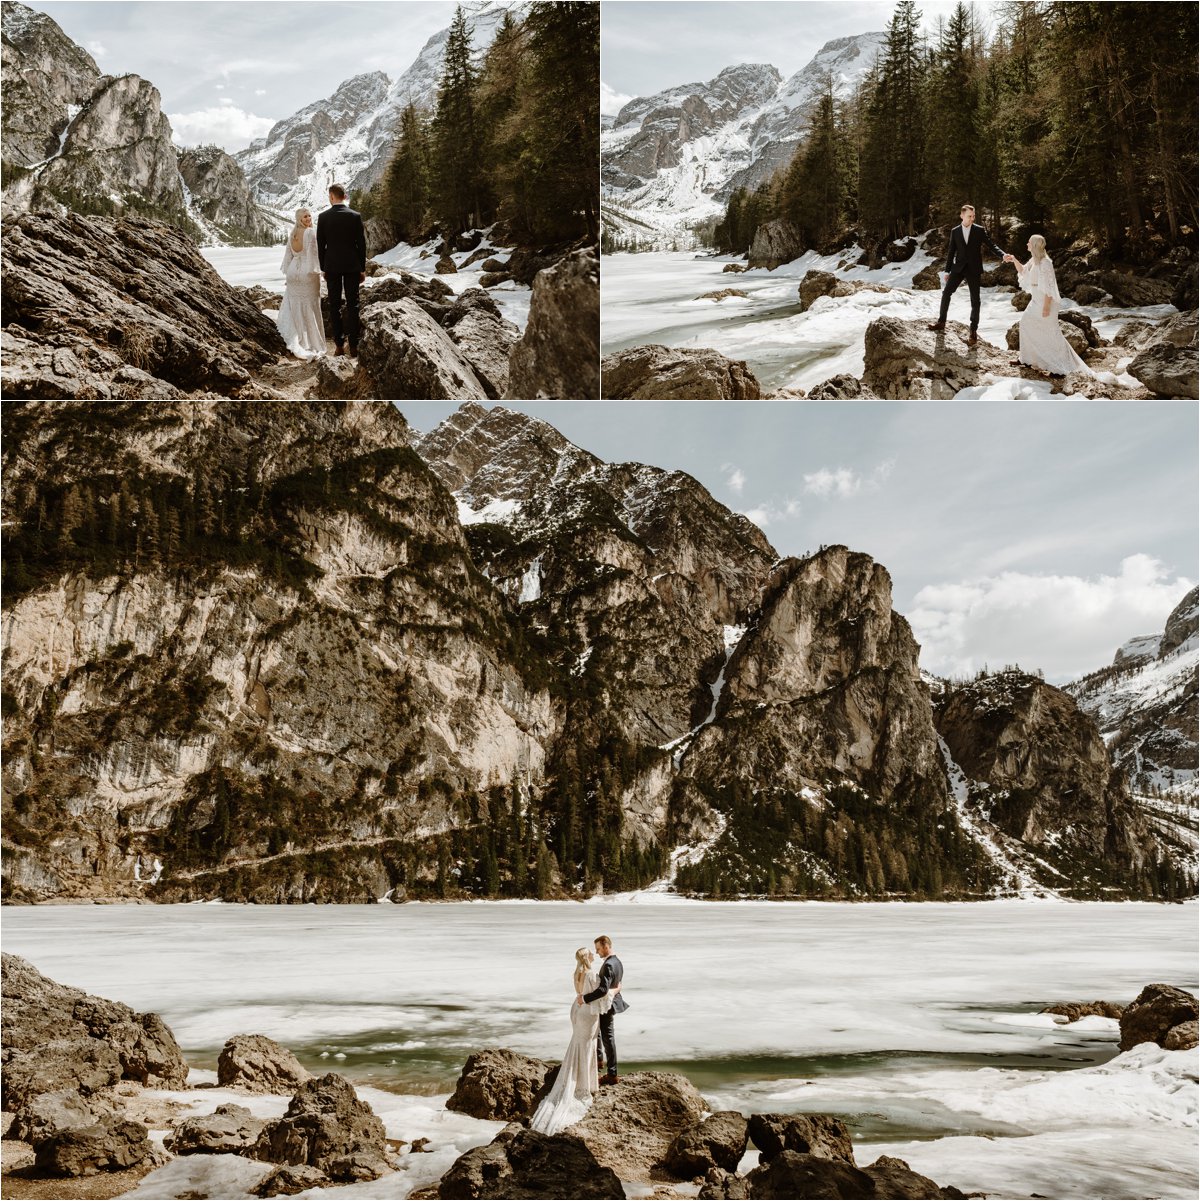 Erika & Nathan climb the rocks around the shores of Lago di Braies in the Dolomites. Elopement Photos by Wild Connections Photography